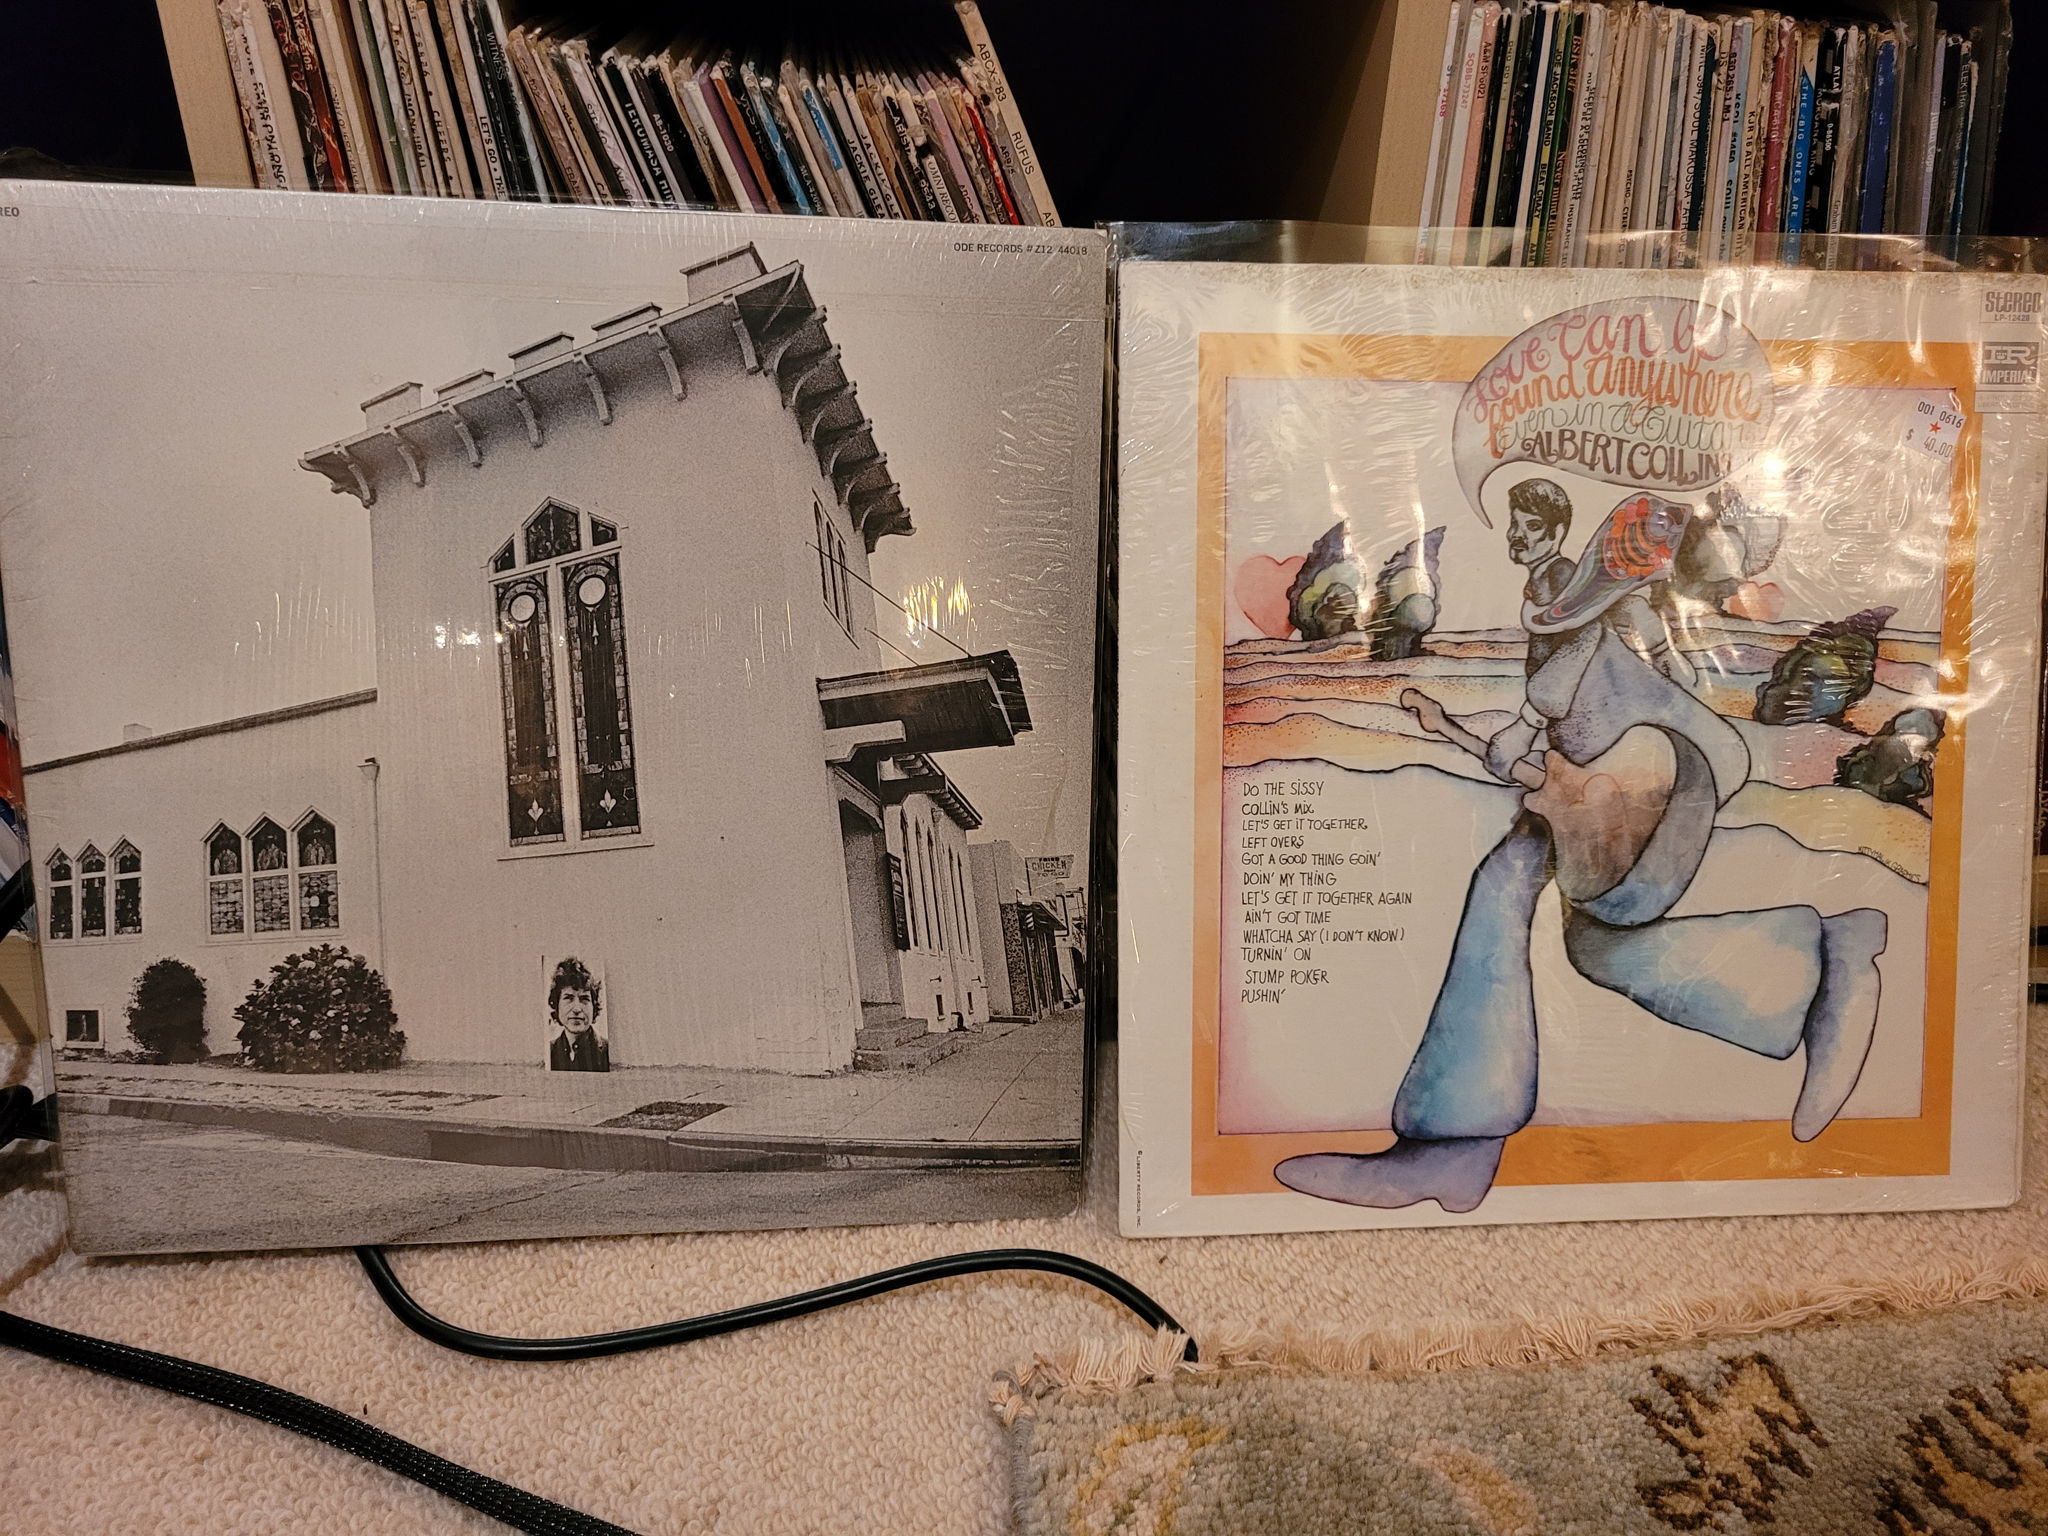 A couple more representative pieces - On the left, original Ode pressing of the "Dylan's Gospel" album by the Brothers and Sisters. To the right is a nice OG Albert Collins pressing.